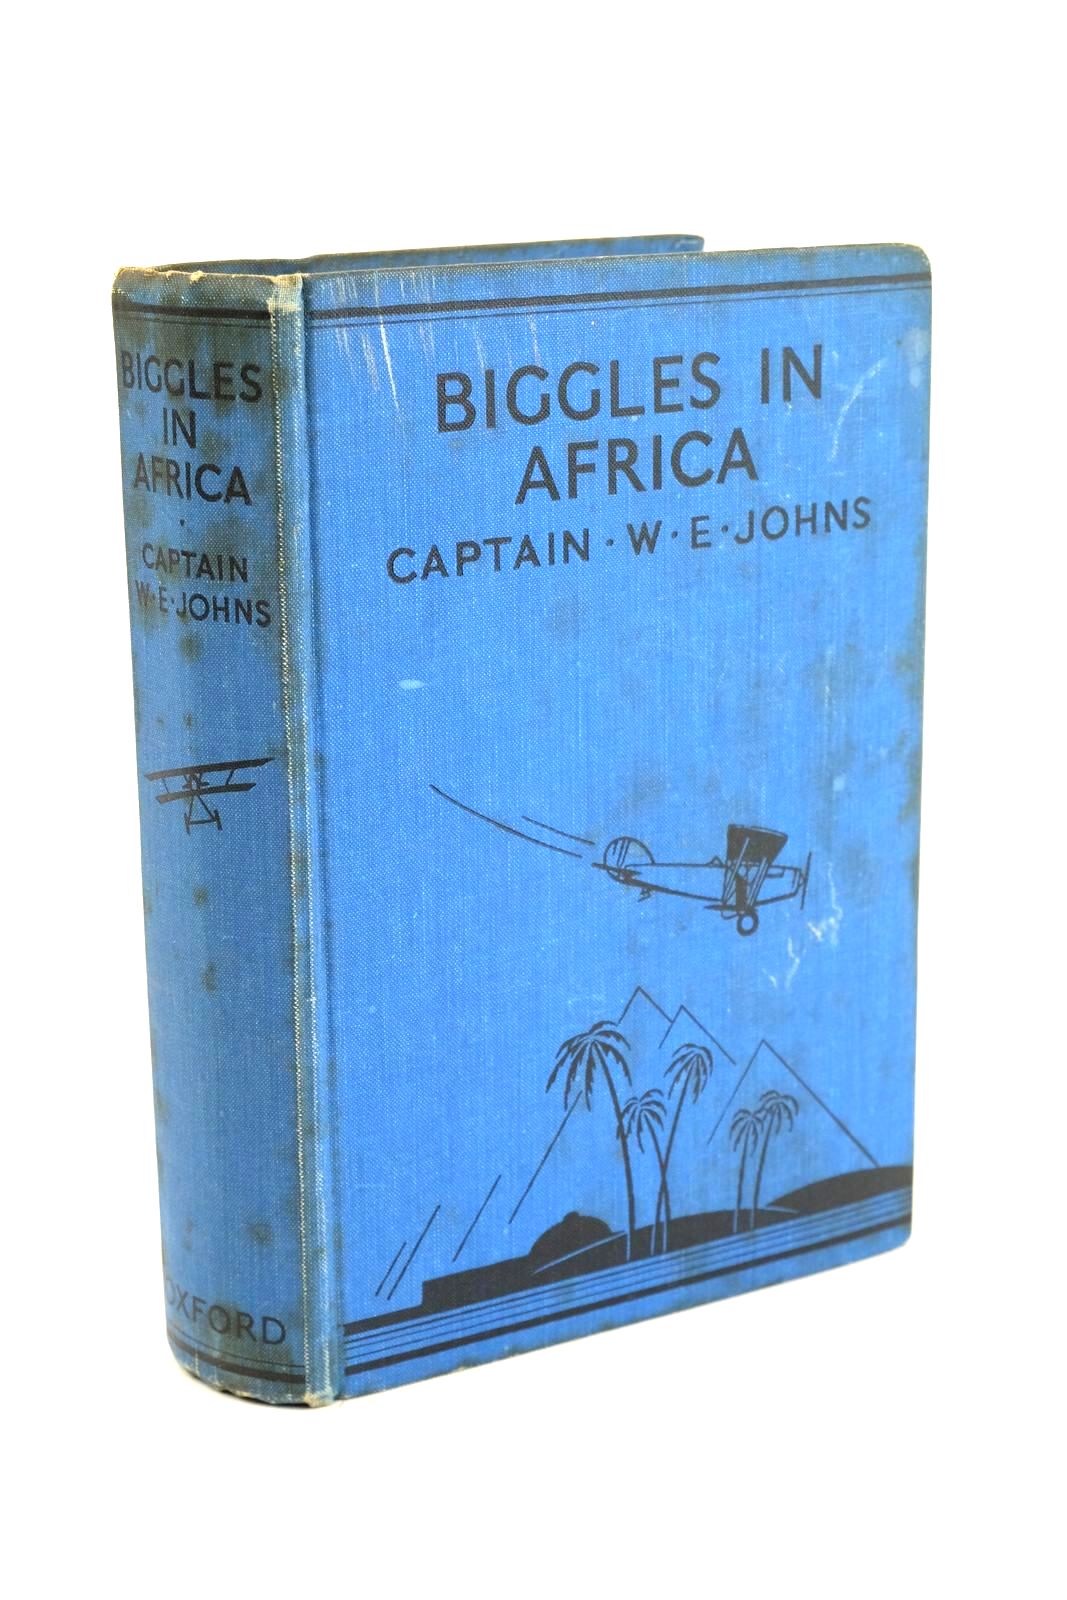 Photo of BIGGLES IN AFRICA written by Johns, W.E. illustrated by Leigh, Howard Sindall, Alfred published by Oxford University Press, Humphrey Milford (STOCK CODE: 1324107)  for sale by Stella & Rose's Books